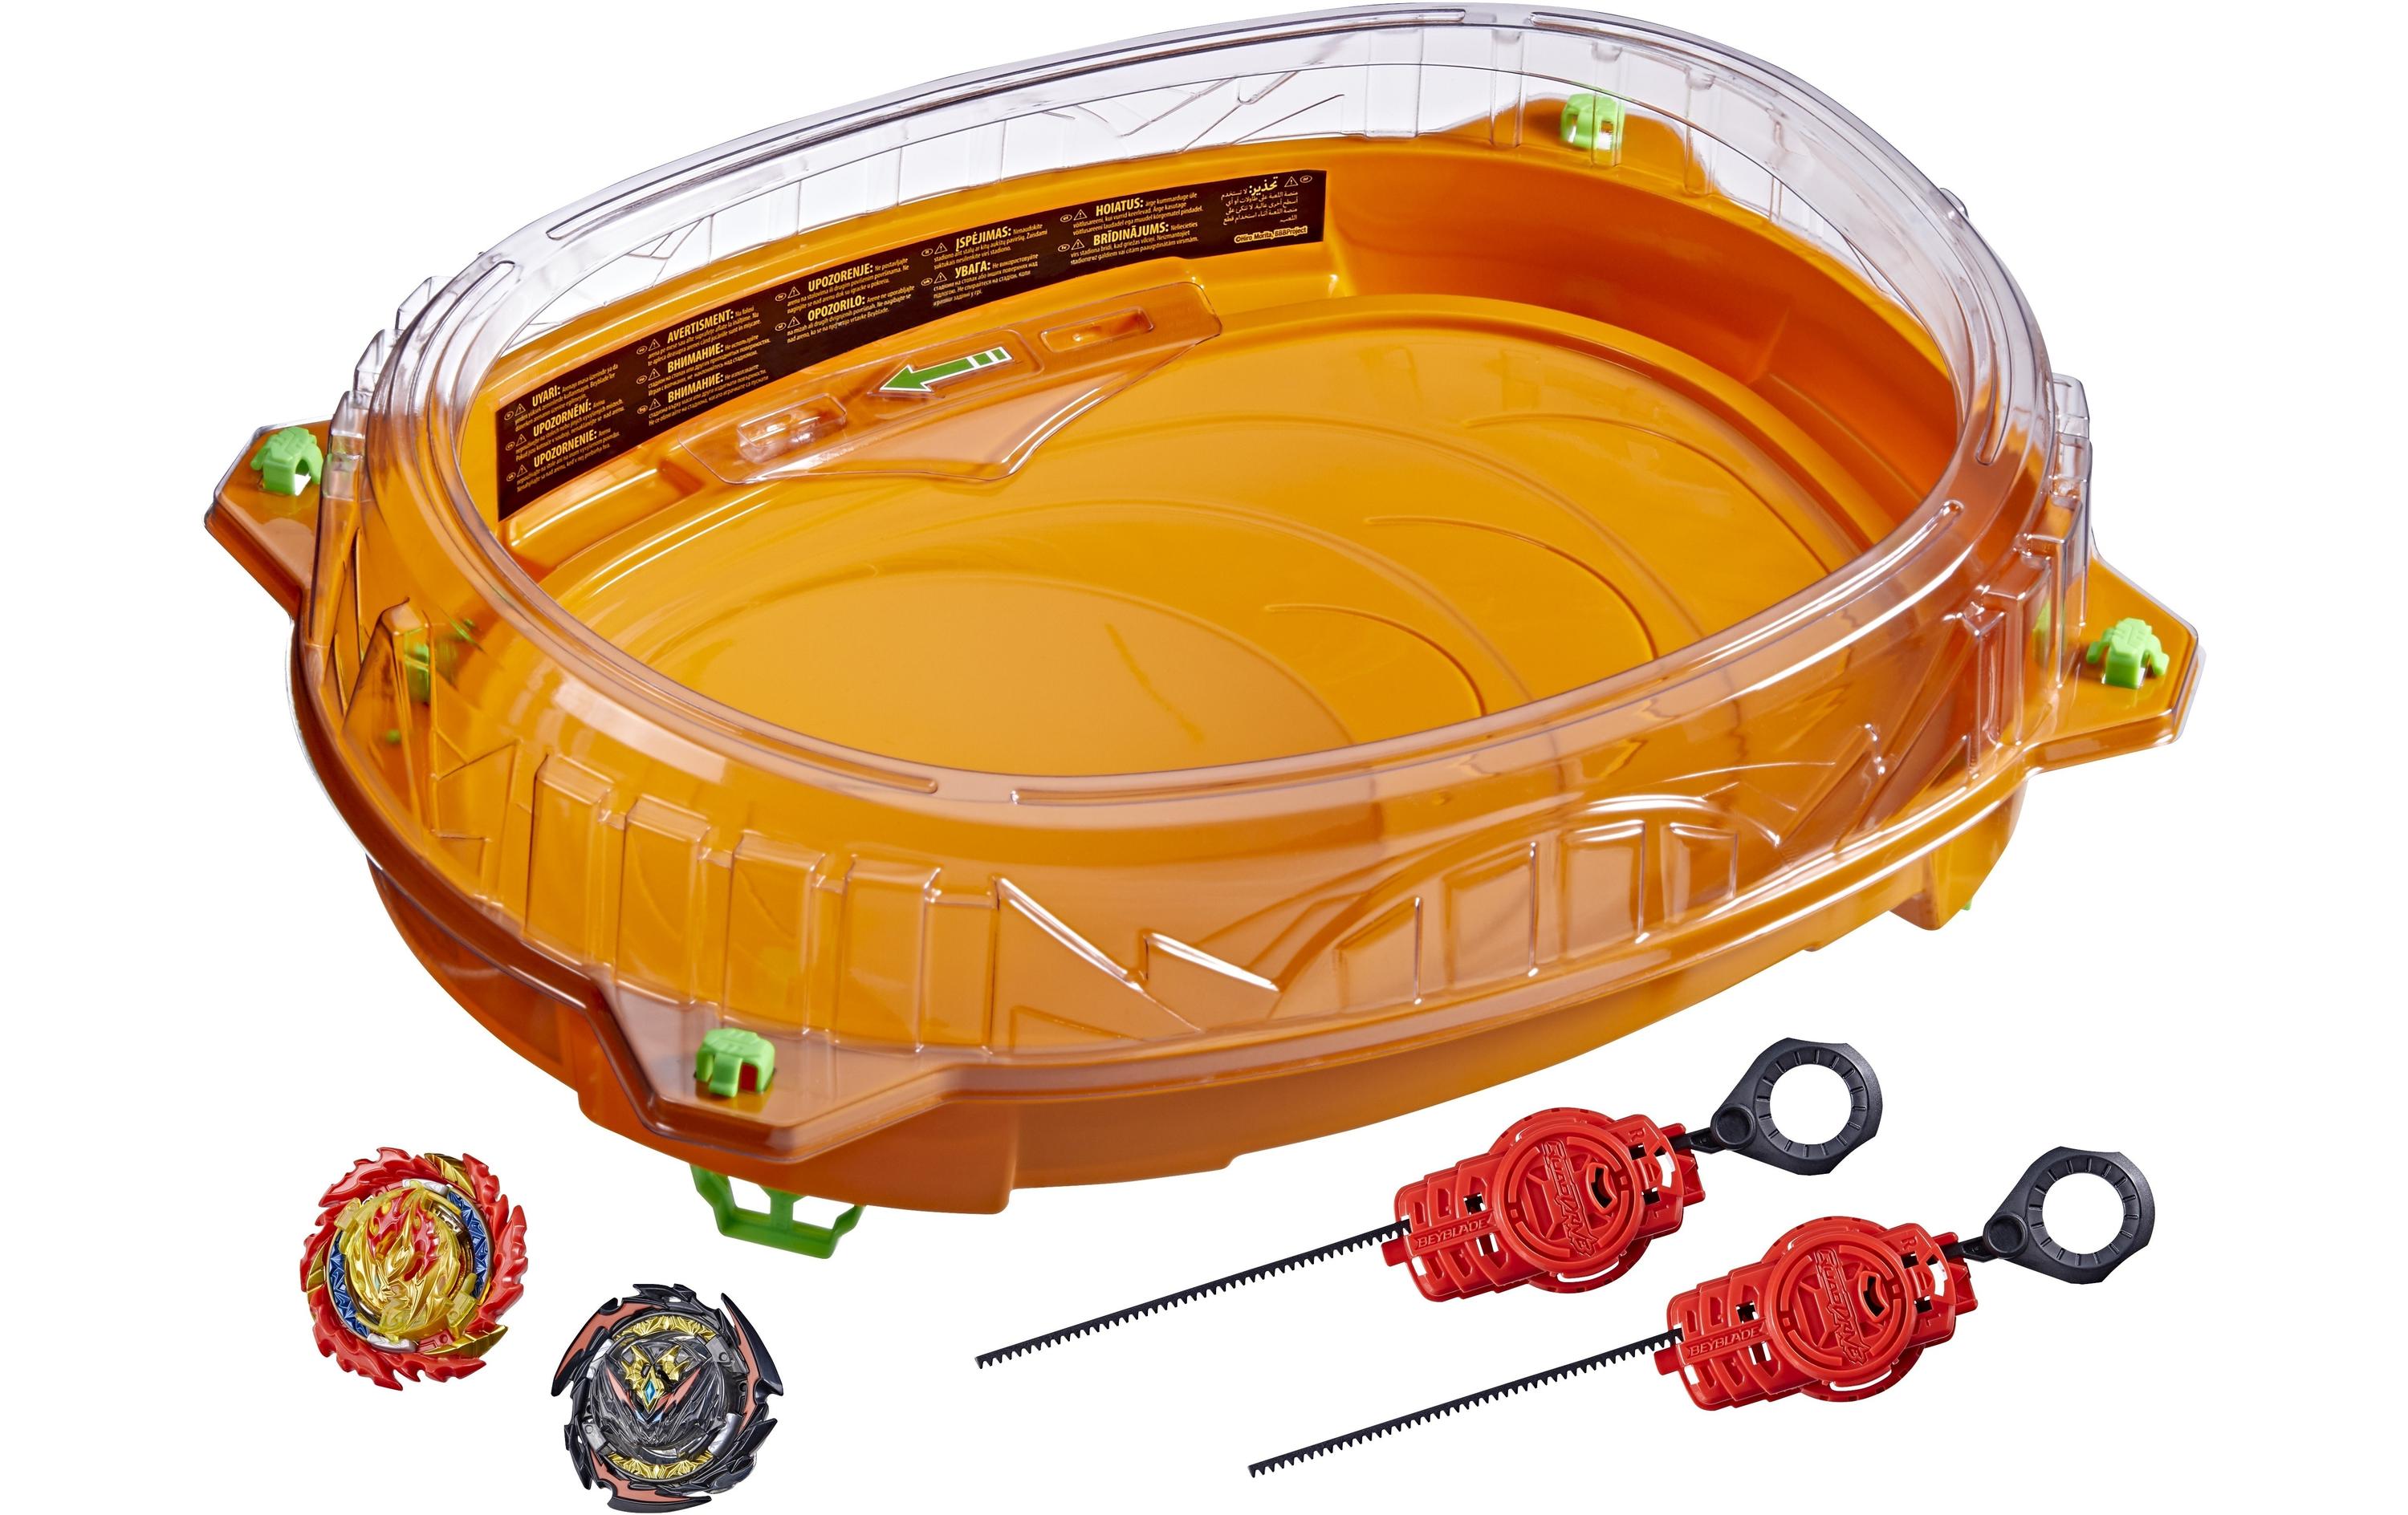 Buy Beyblade products online -